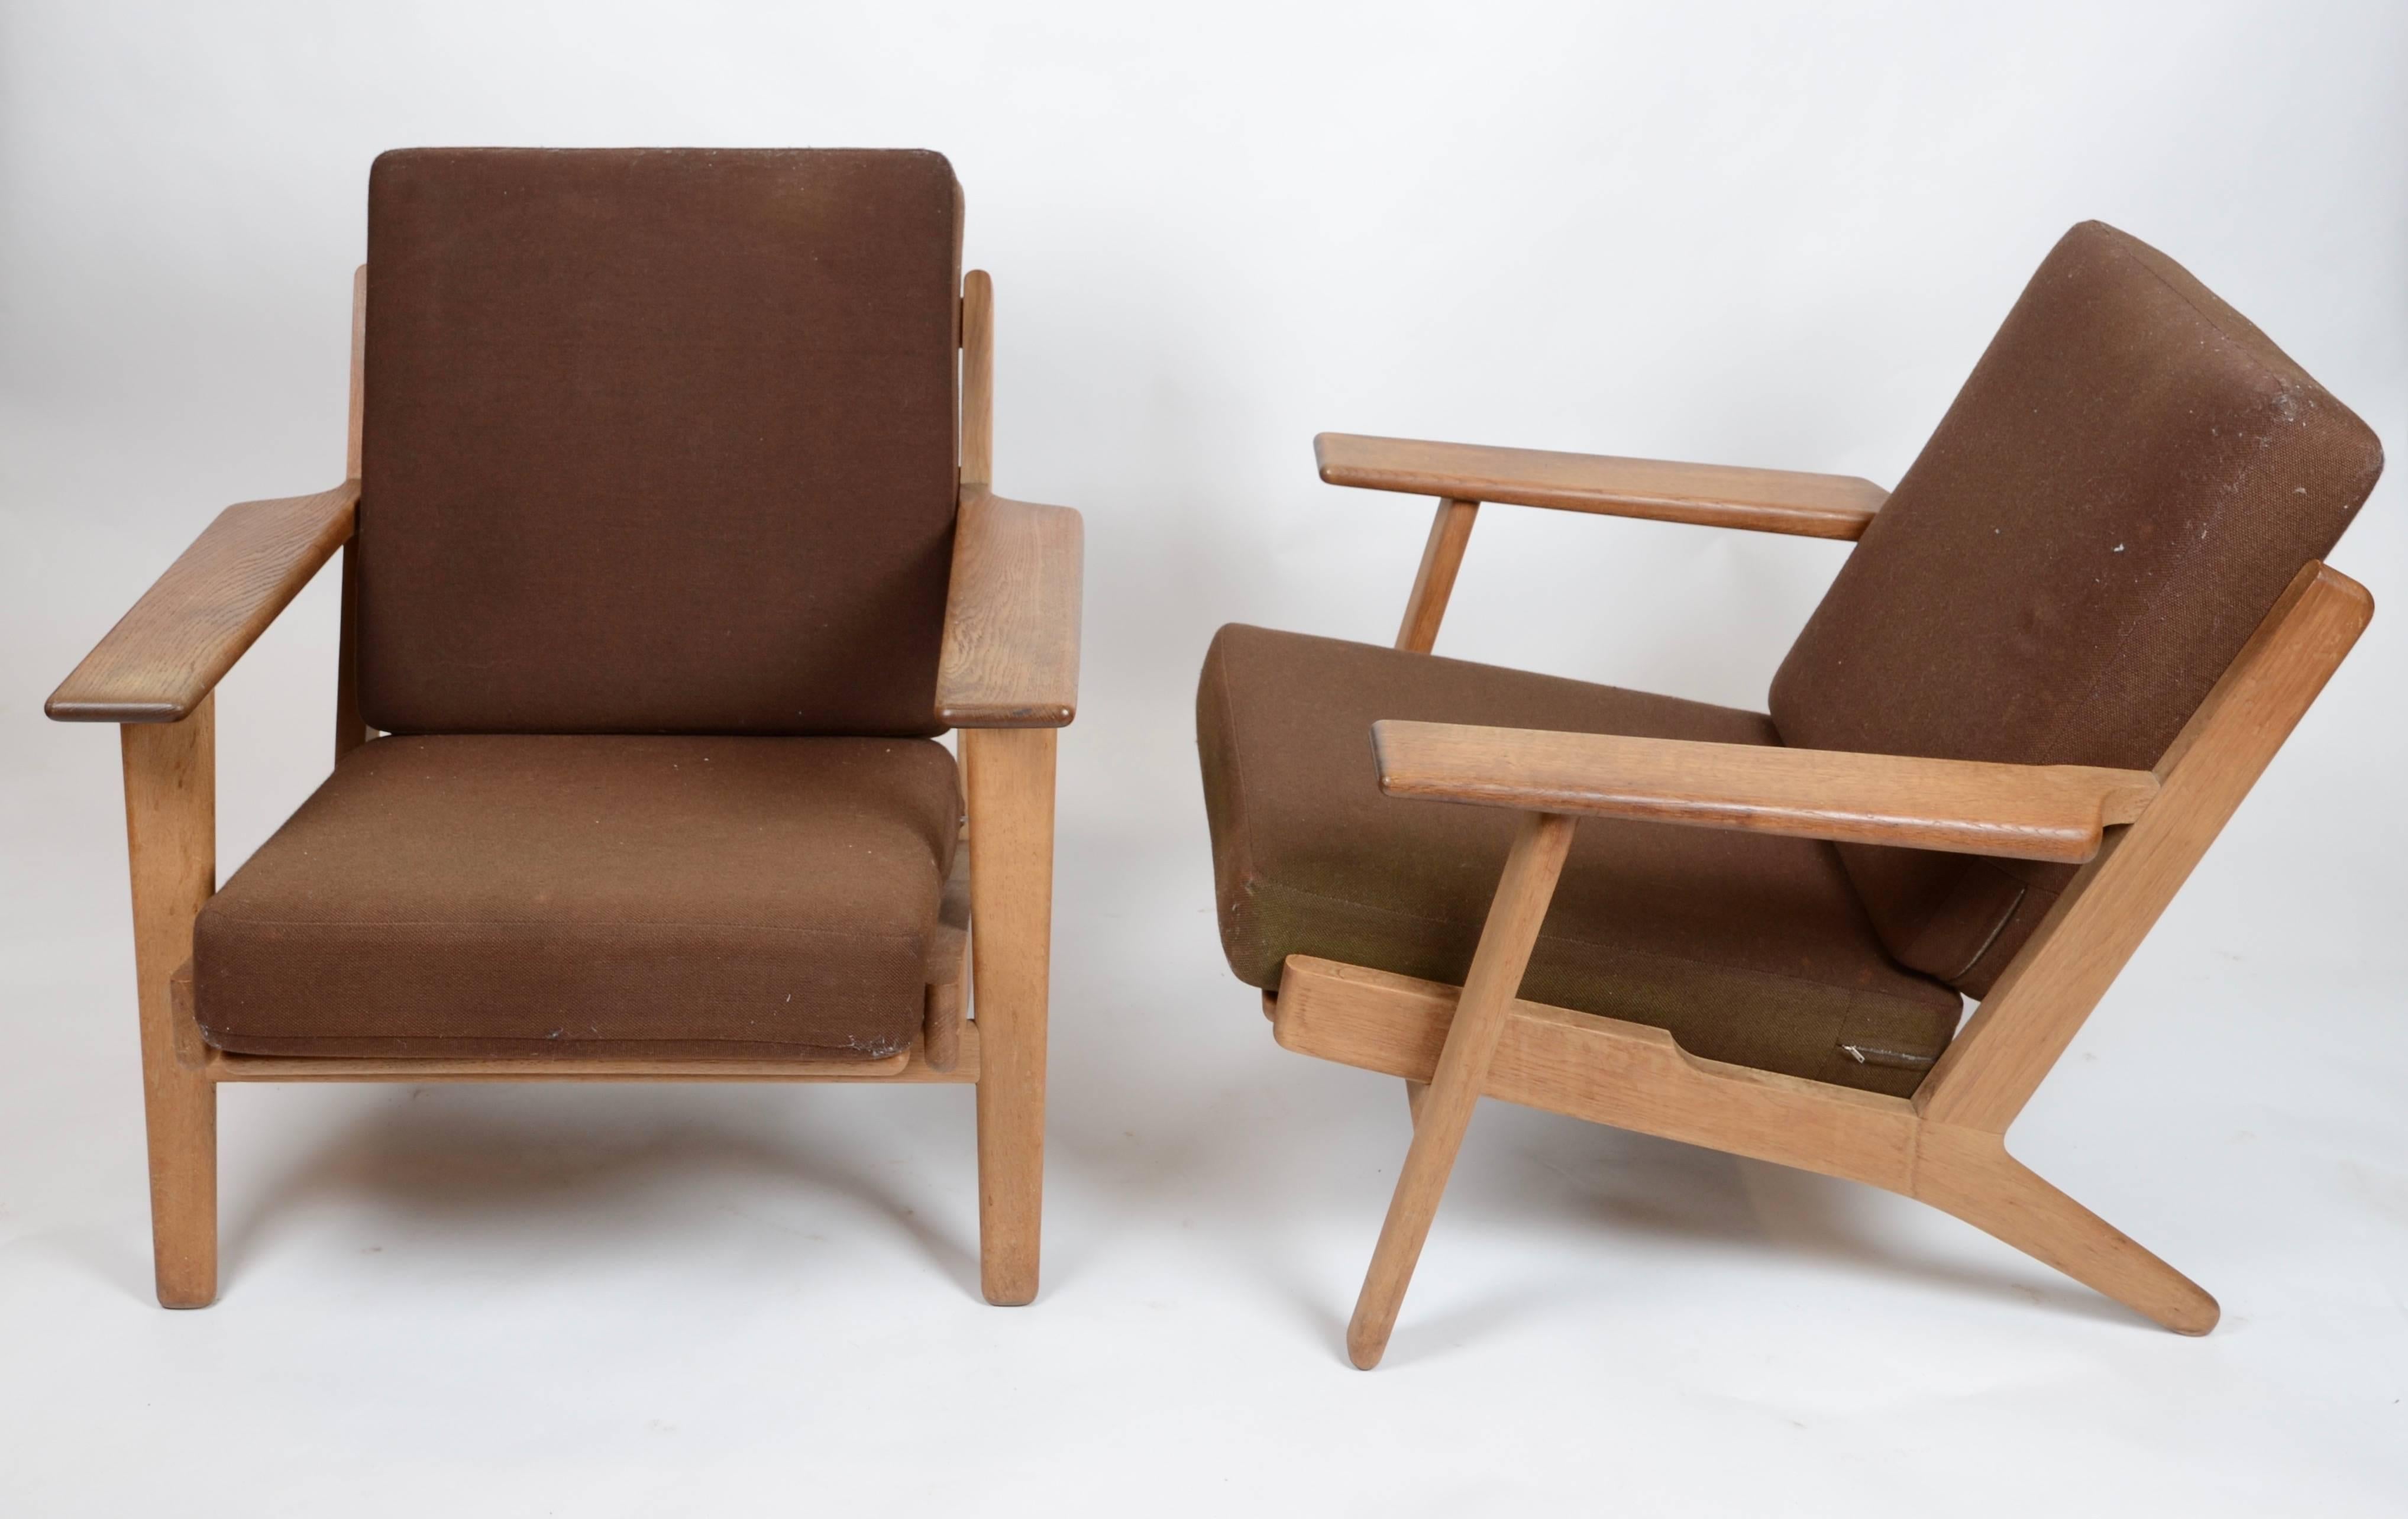 A pair of lounge chair with stools, model GE-290 in oak. Designed by Hans J. Wegner for GETAMA, Denmark, mid-20th century.